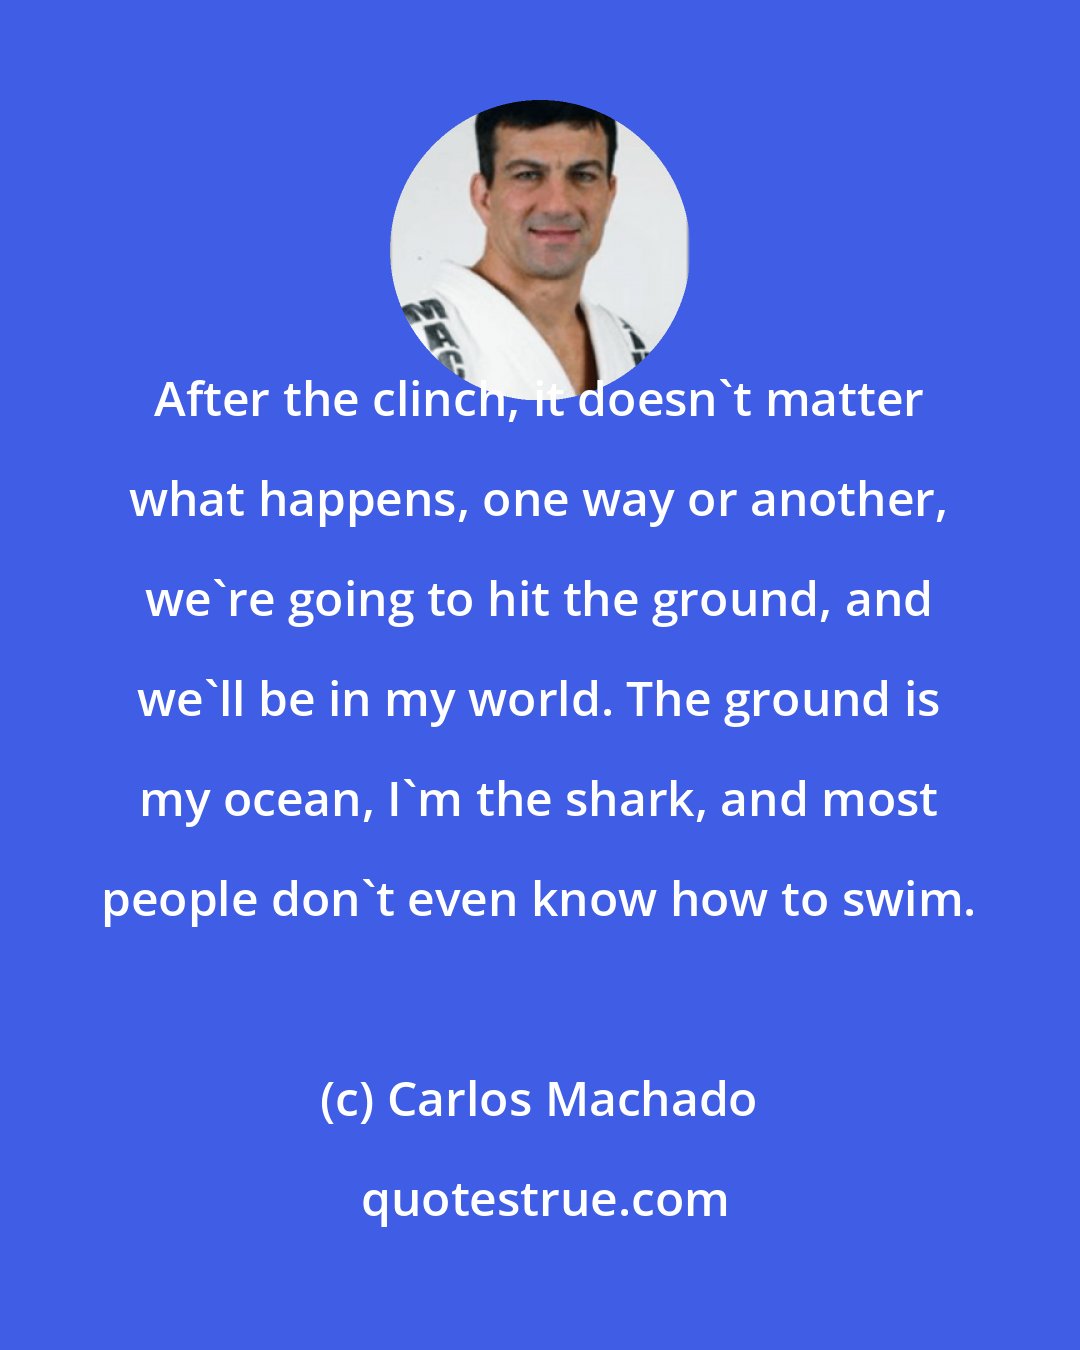 Carlos Machado: After the clinch, it doesn't matter what happens, one way or another, we're going to hit the ground, and we'll be in my world. The ground is my ocean, I'm the shark, and most people don't even know how to swim.